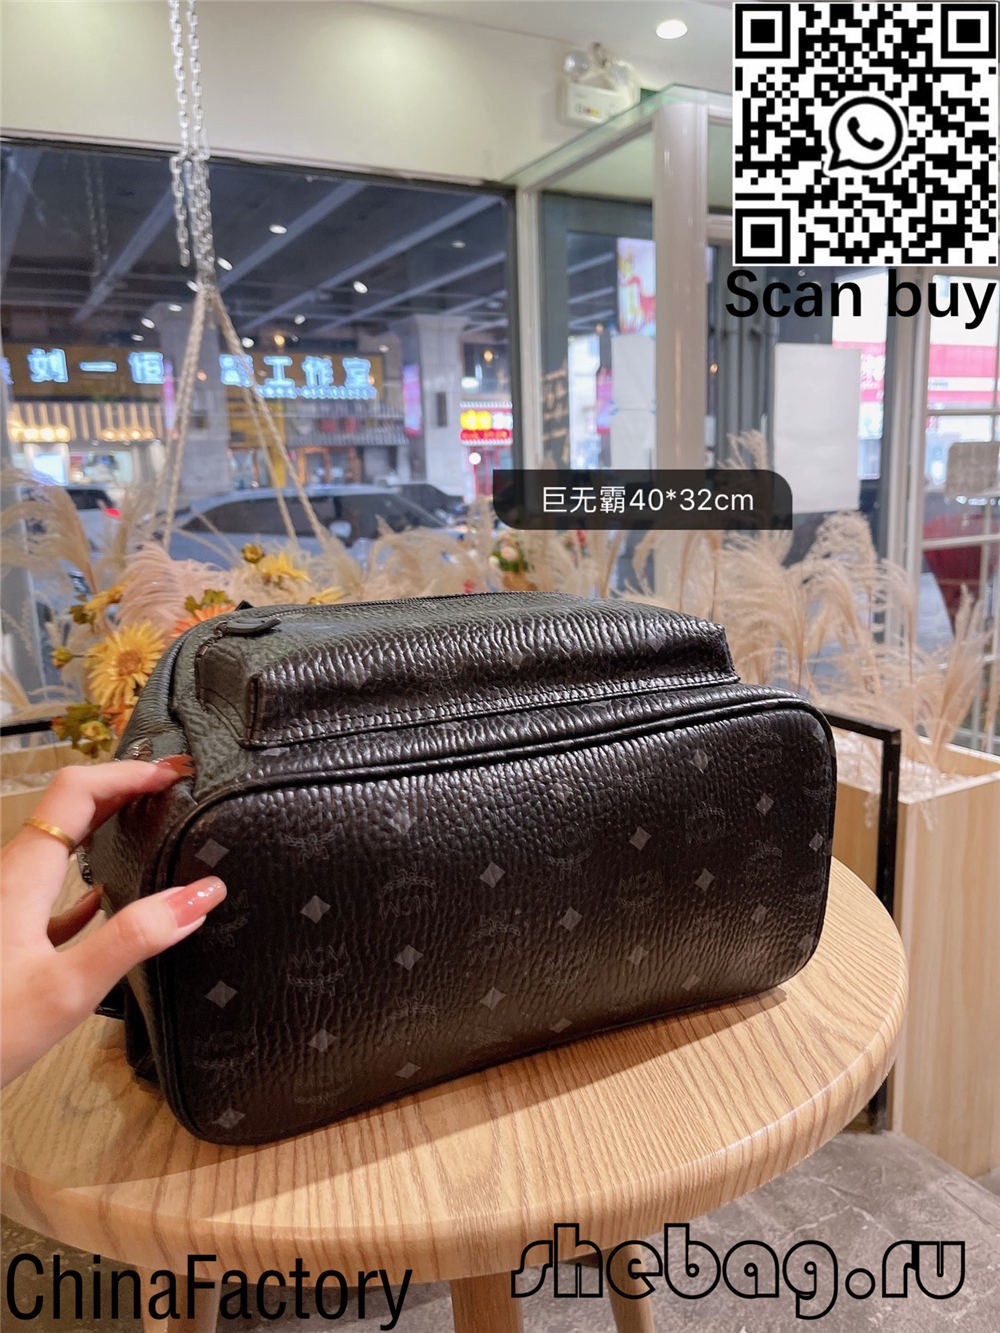 How many of the most worthwhile MCM replica bags are there to buy? (2022 latest)-Best Quality Fake designer Bag Review, Replica designer bag ru